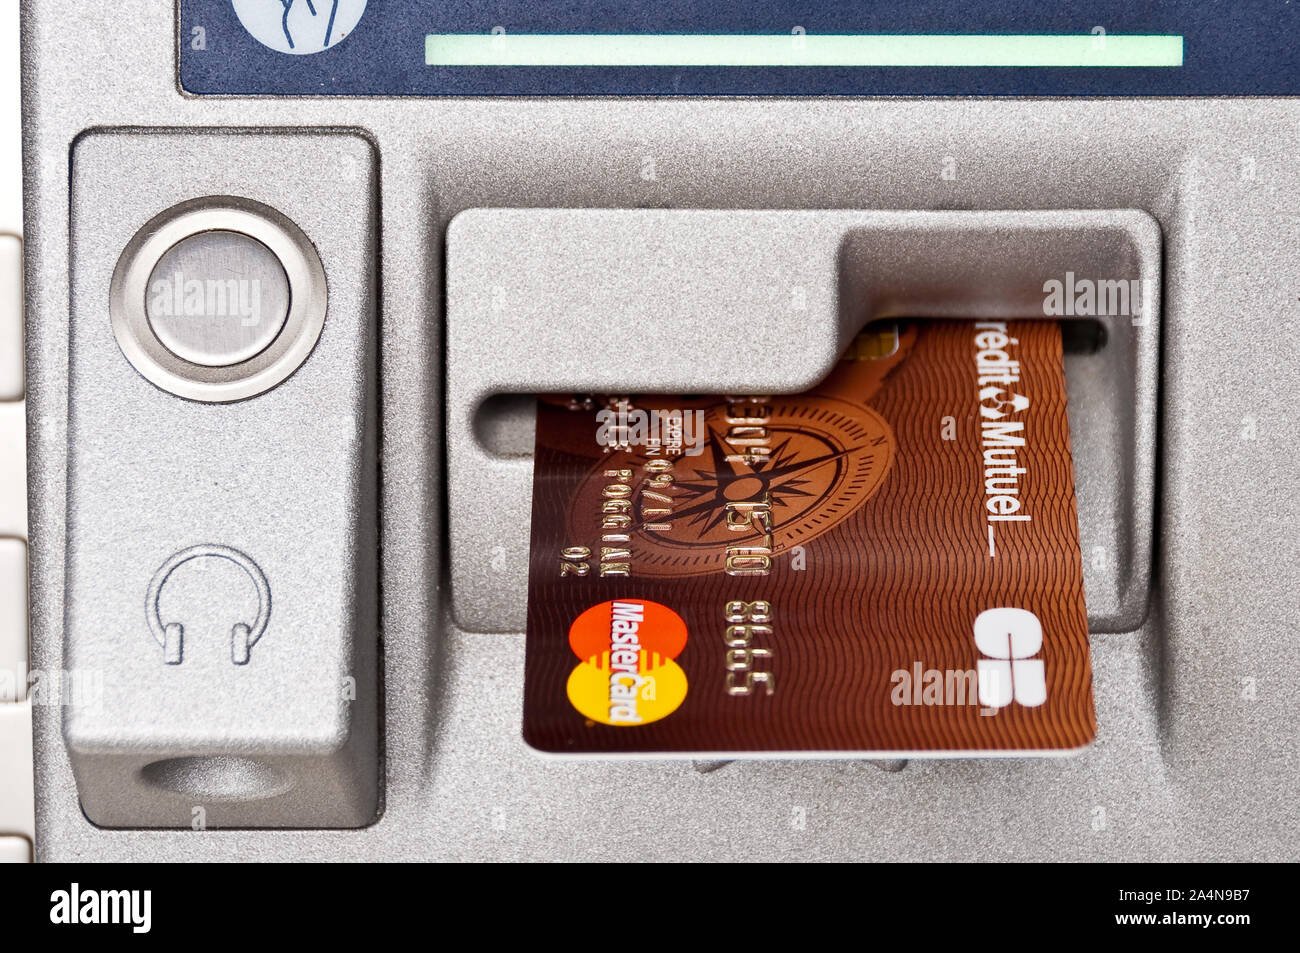 Close up of a Mastercard credit card in a ATM cash dispenser in Fontainebleau, France Stock Photo